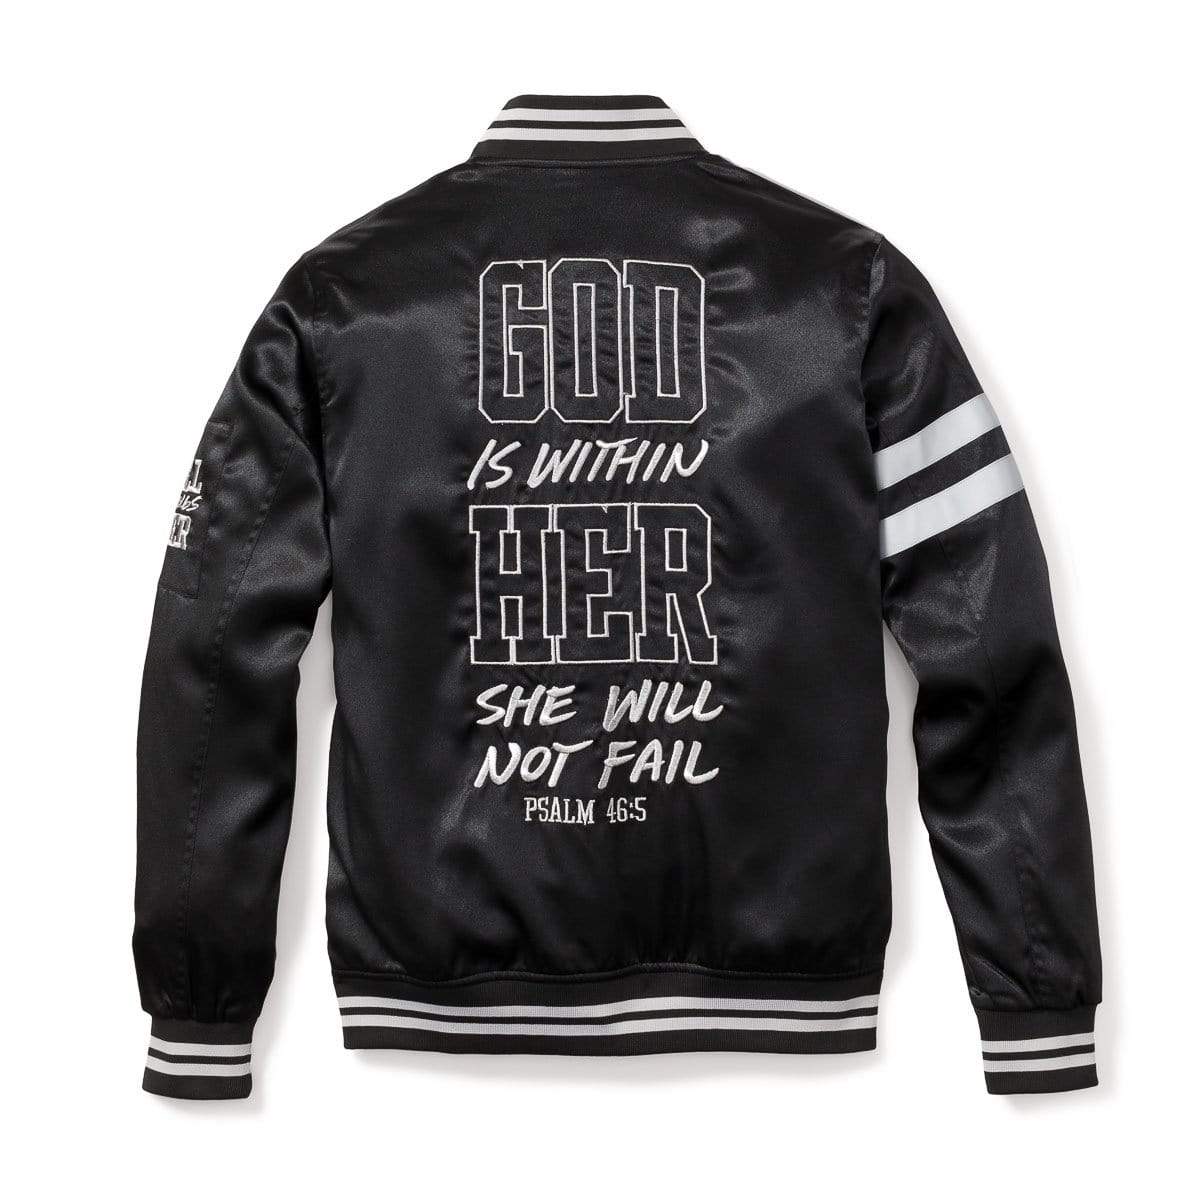 3:16 Collection Jacket XS WITHIN HER - WOMEN'S BOMBER JACKET - BLACK